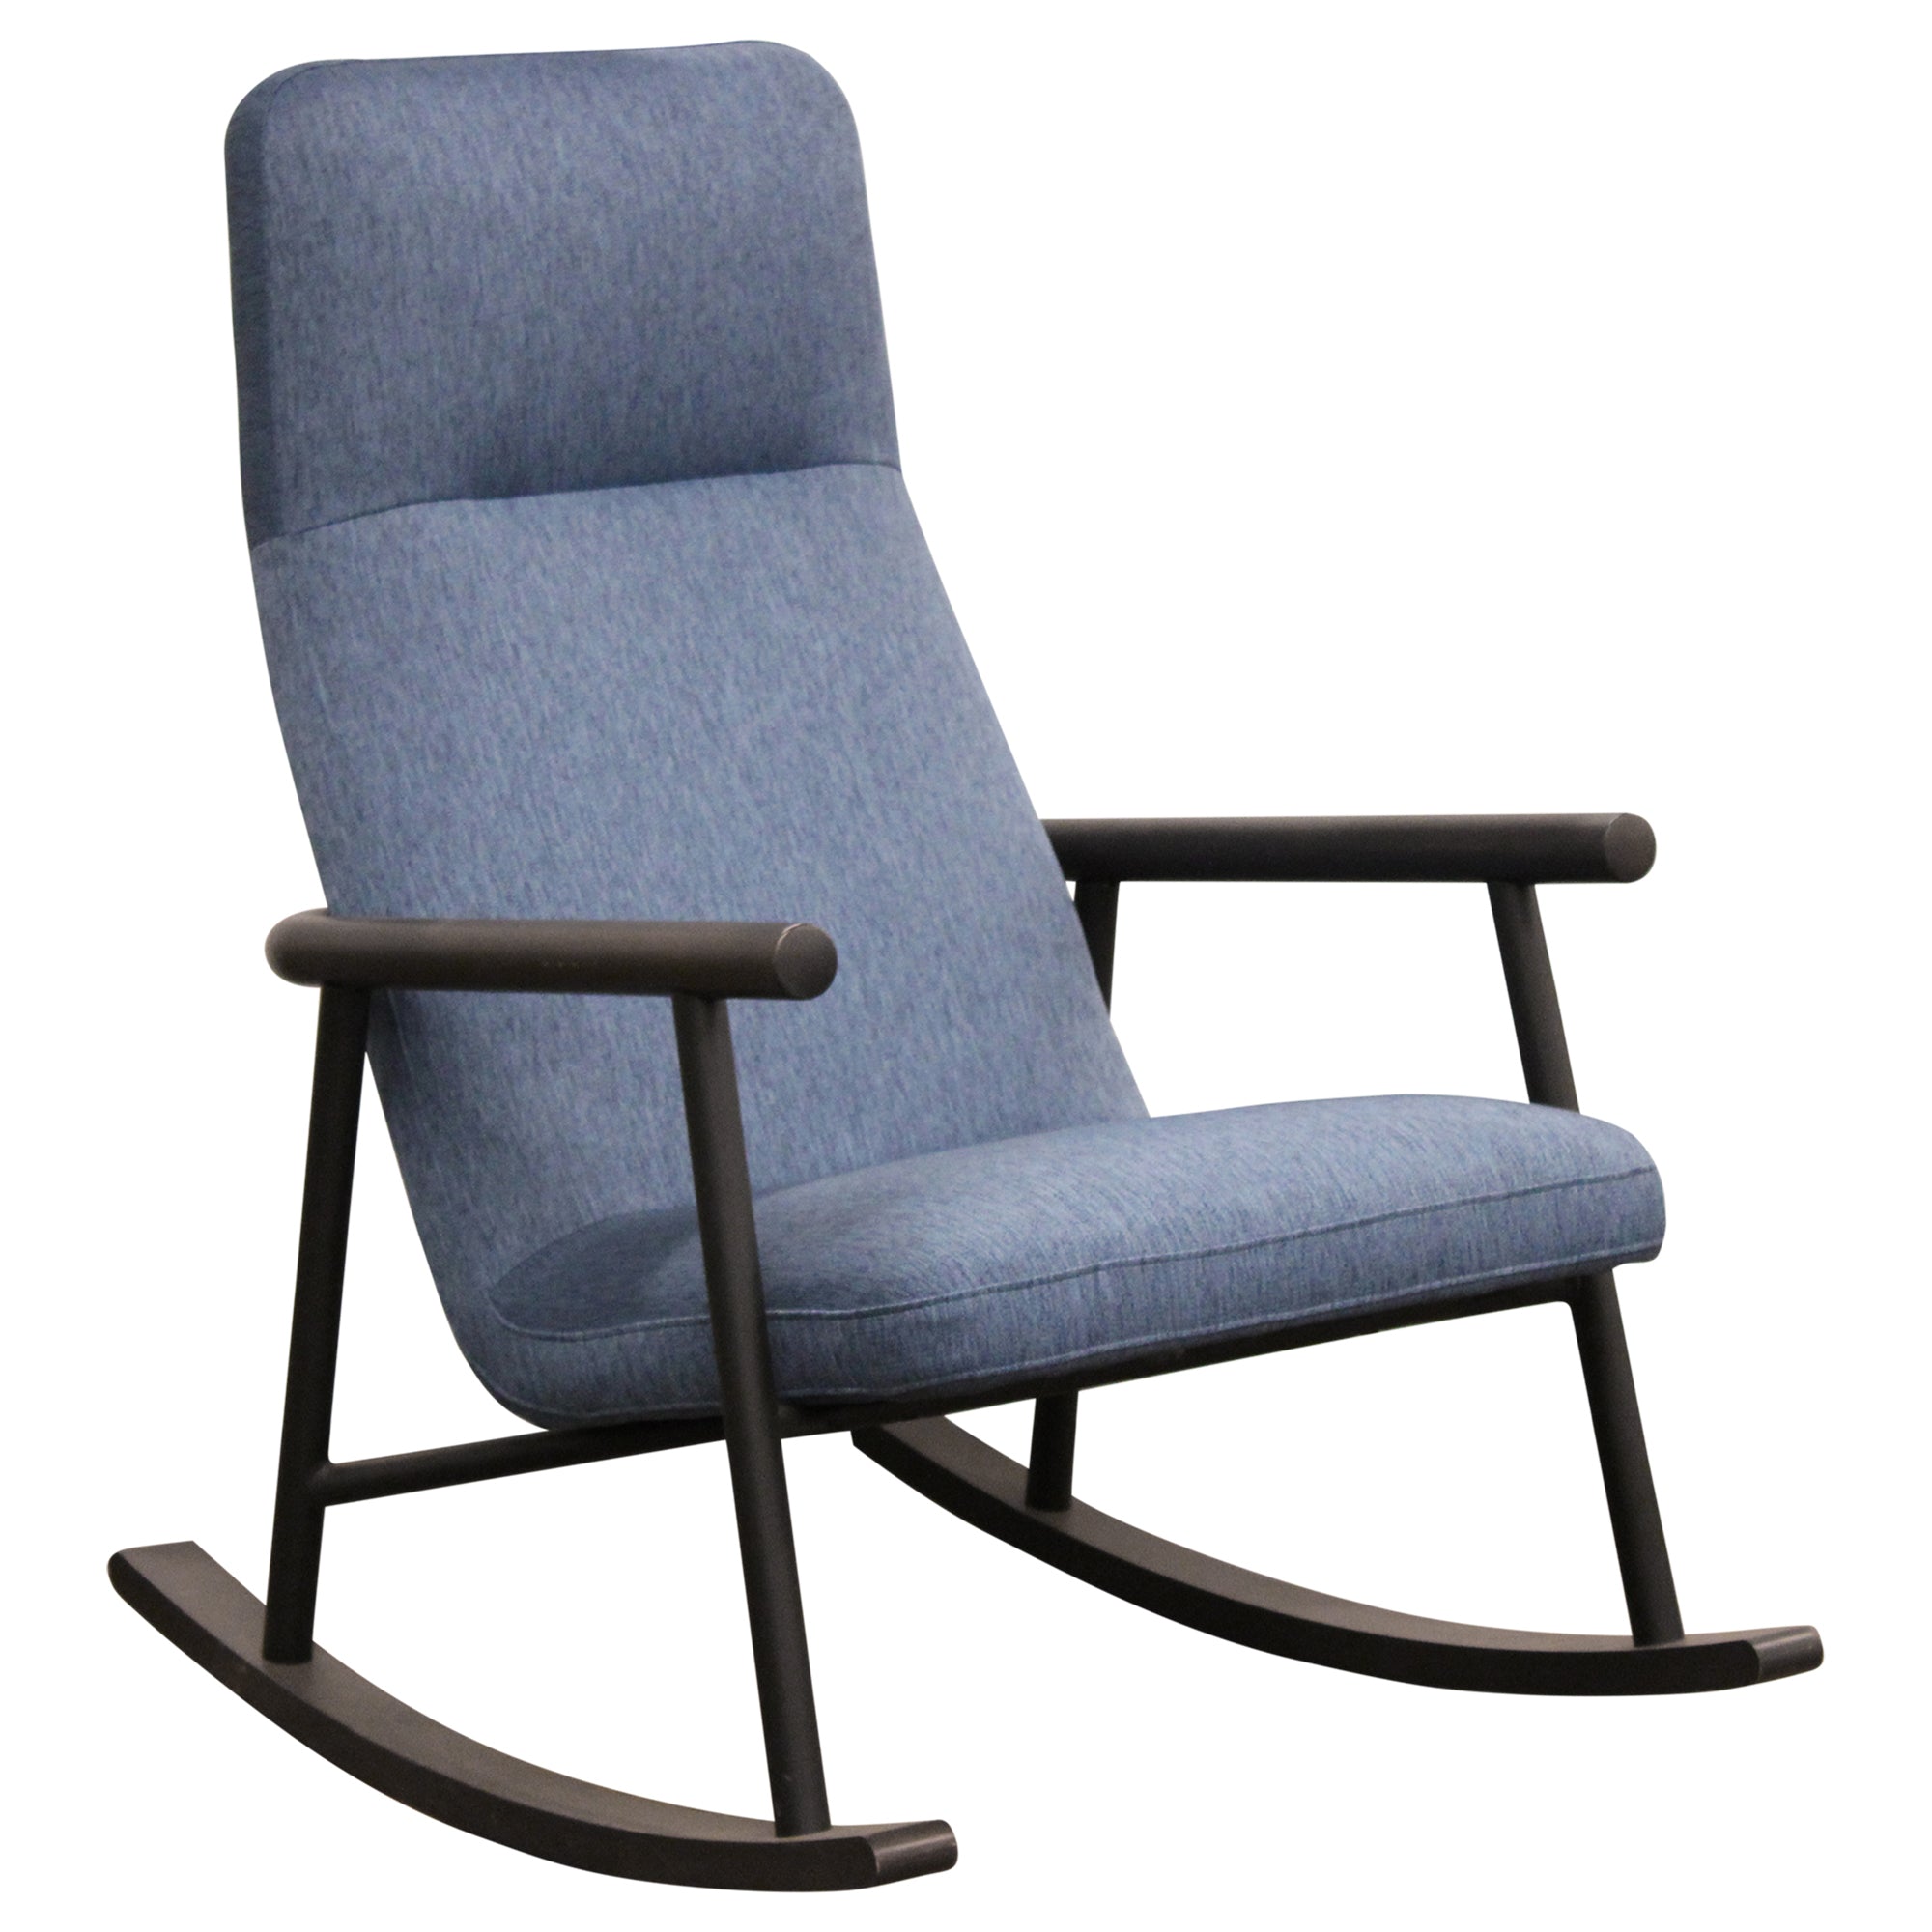 Teknion Routes Rocking Chair, Blue - Preowned